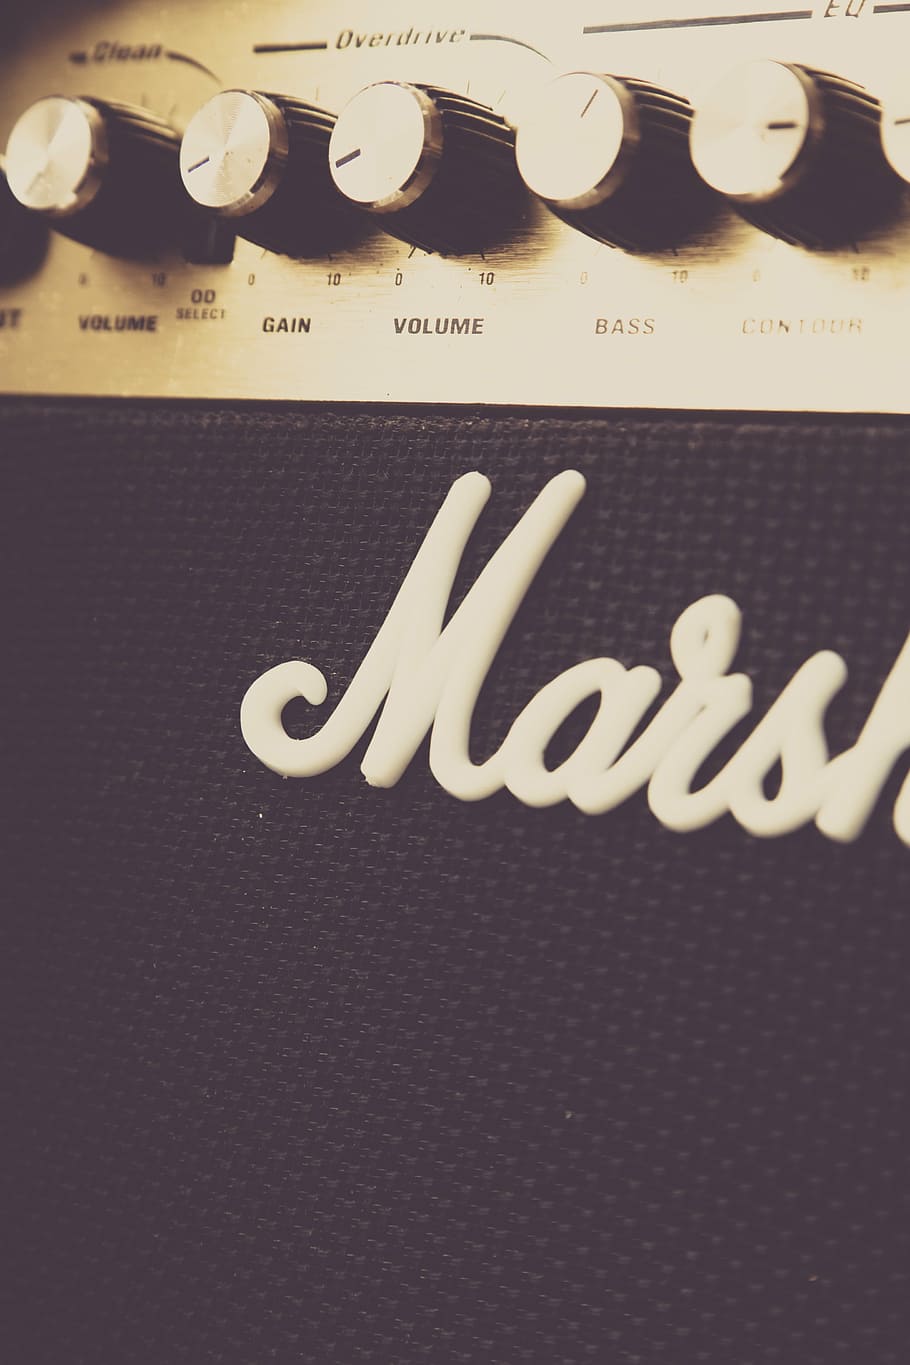 HD Wallpaper: Close Up Photo Of White Marshall Guitar Amplifier